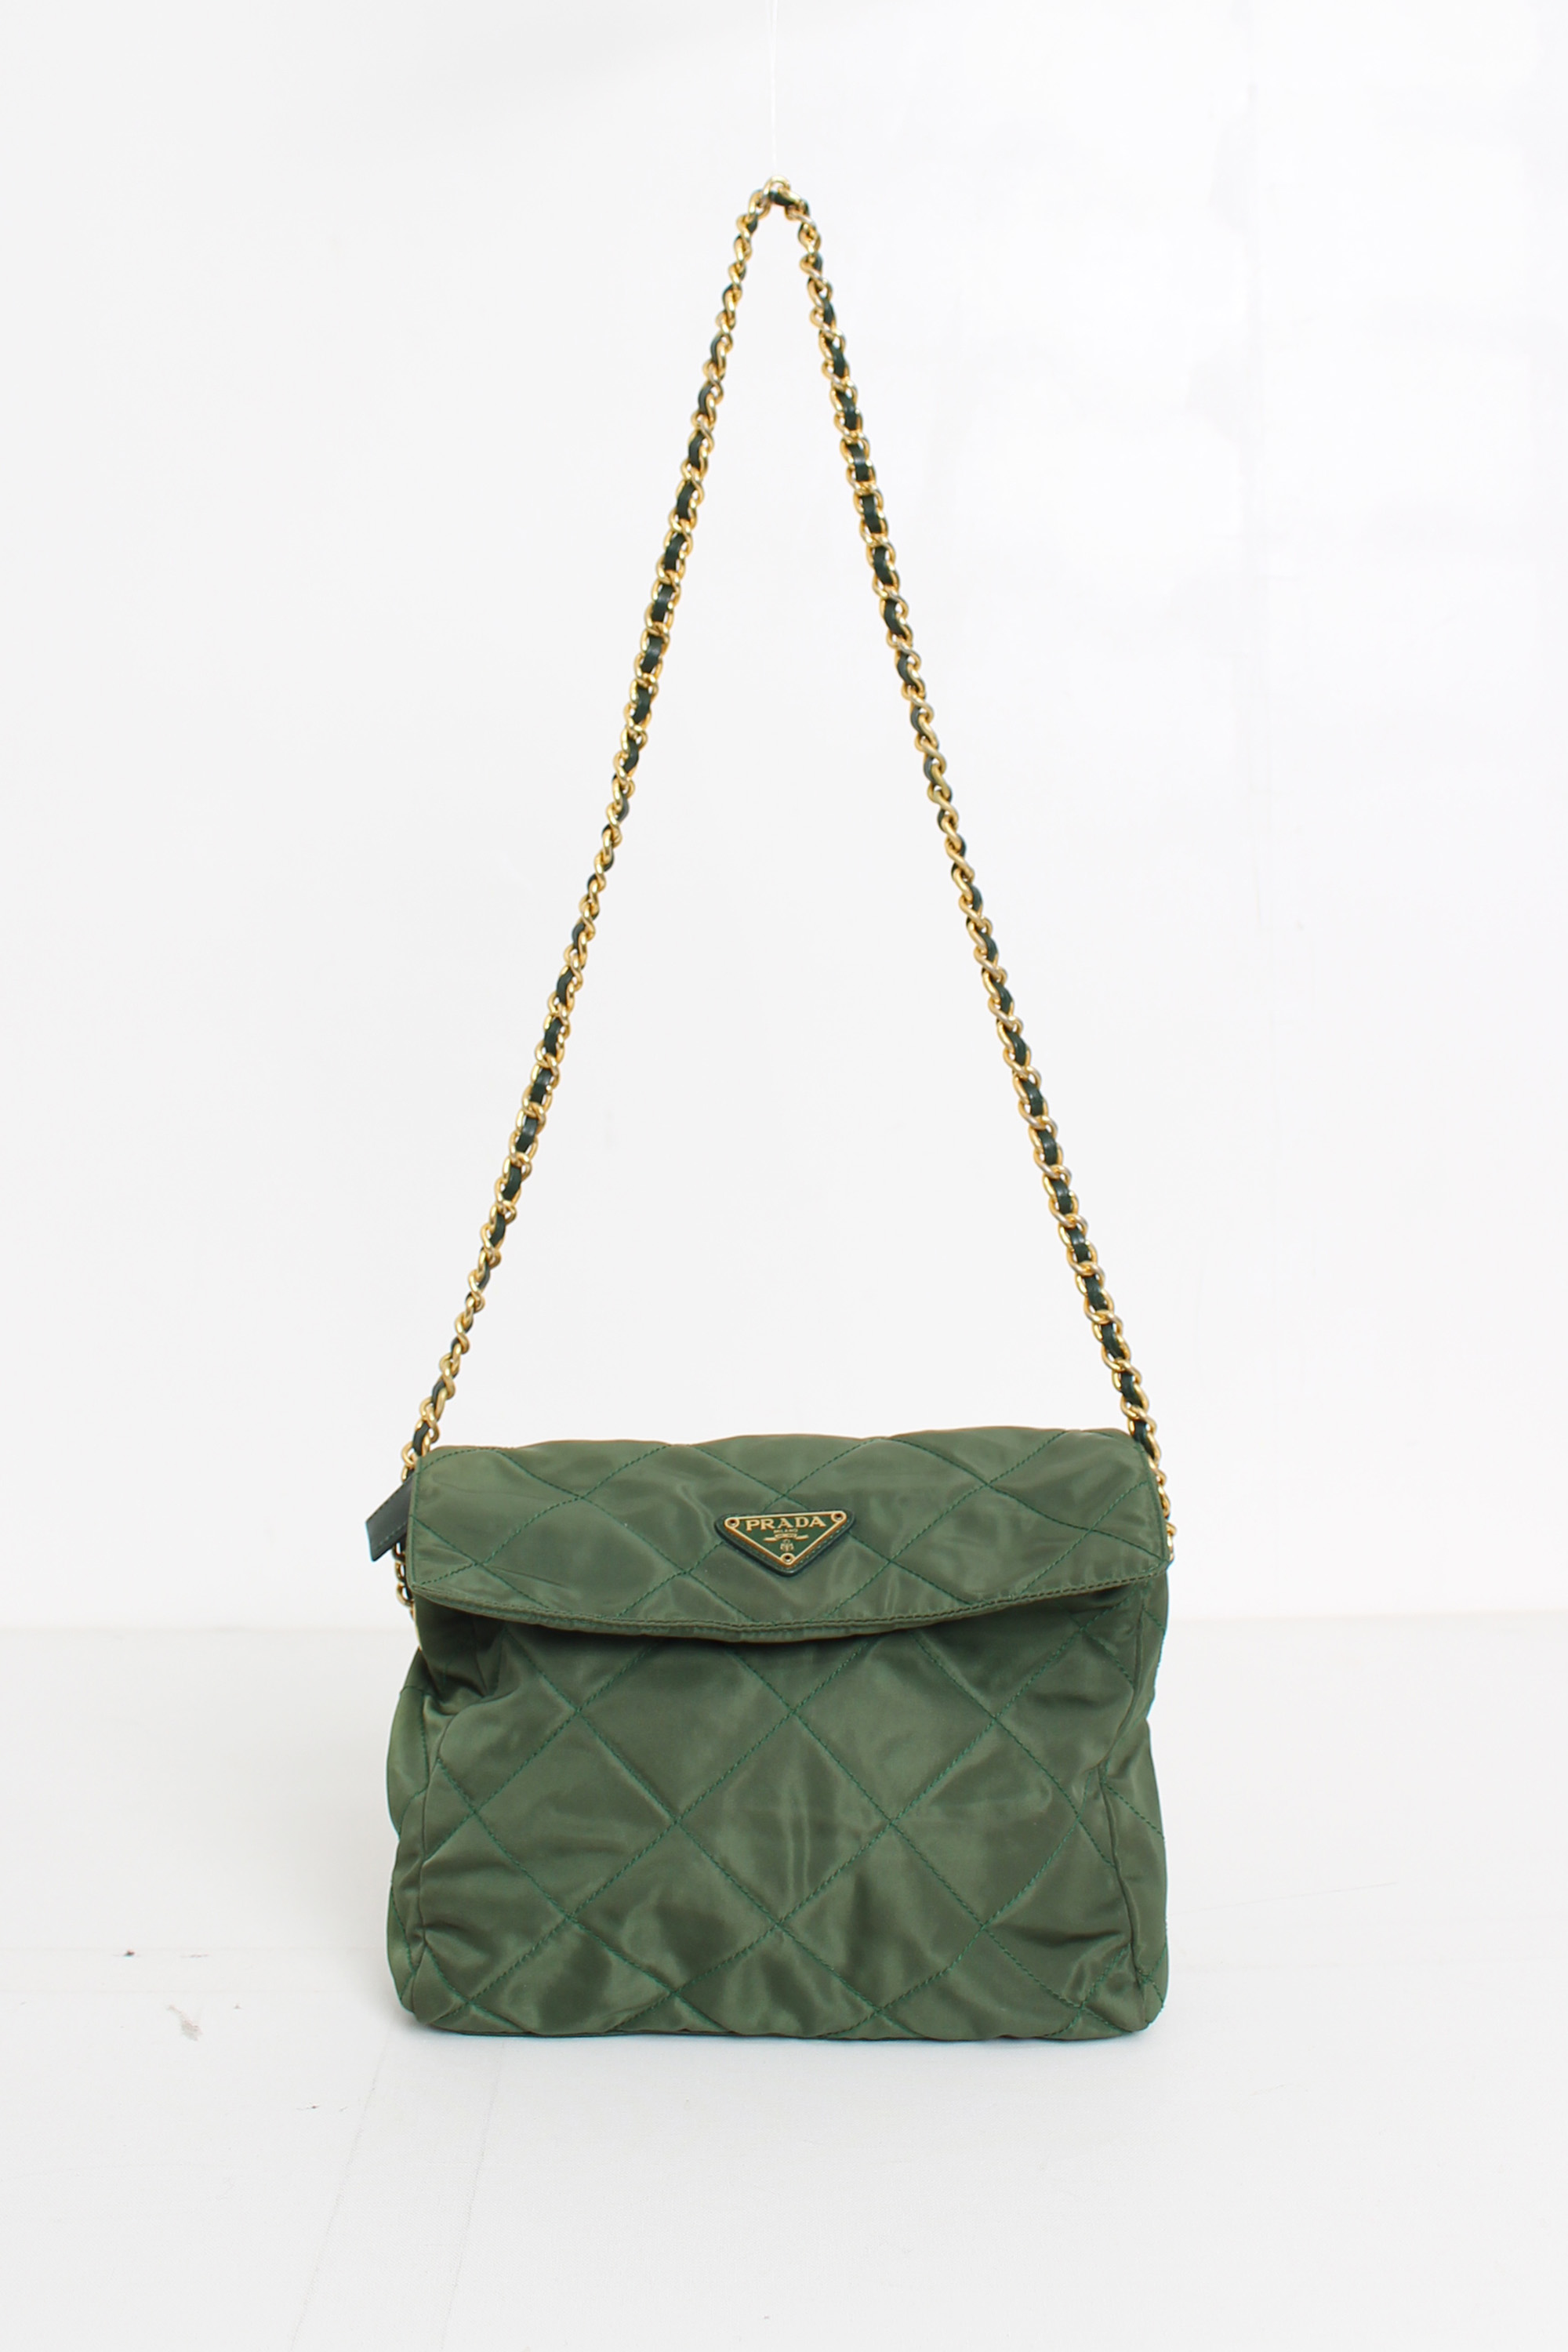 PRADA quilted chain bag